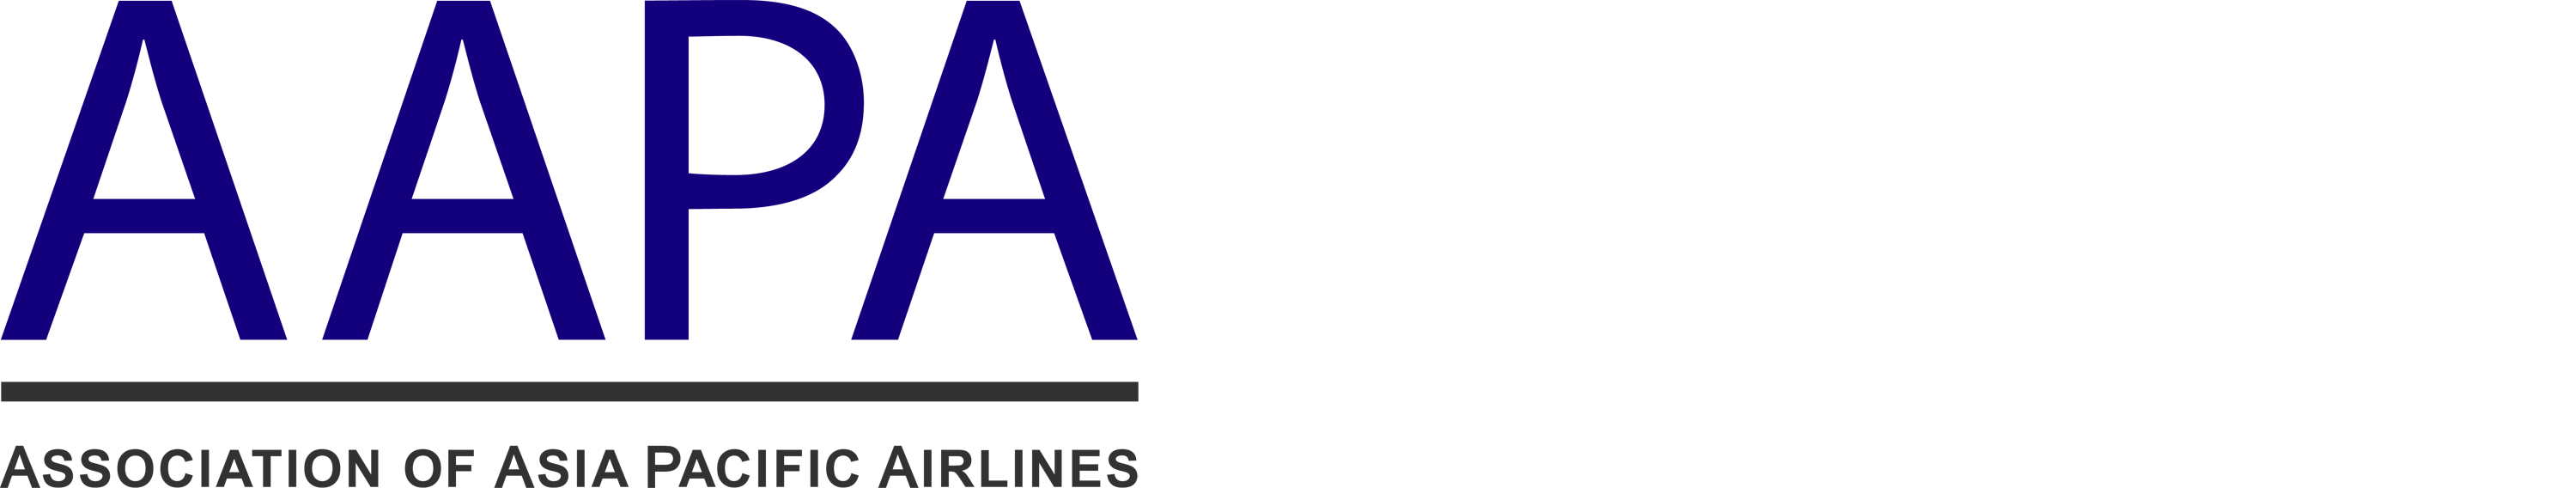 Korean Airlines Logo - AAPA – Association of Asia Pacific Airlines